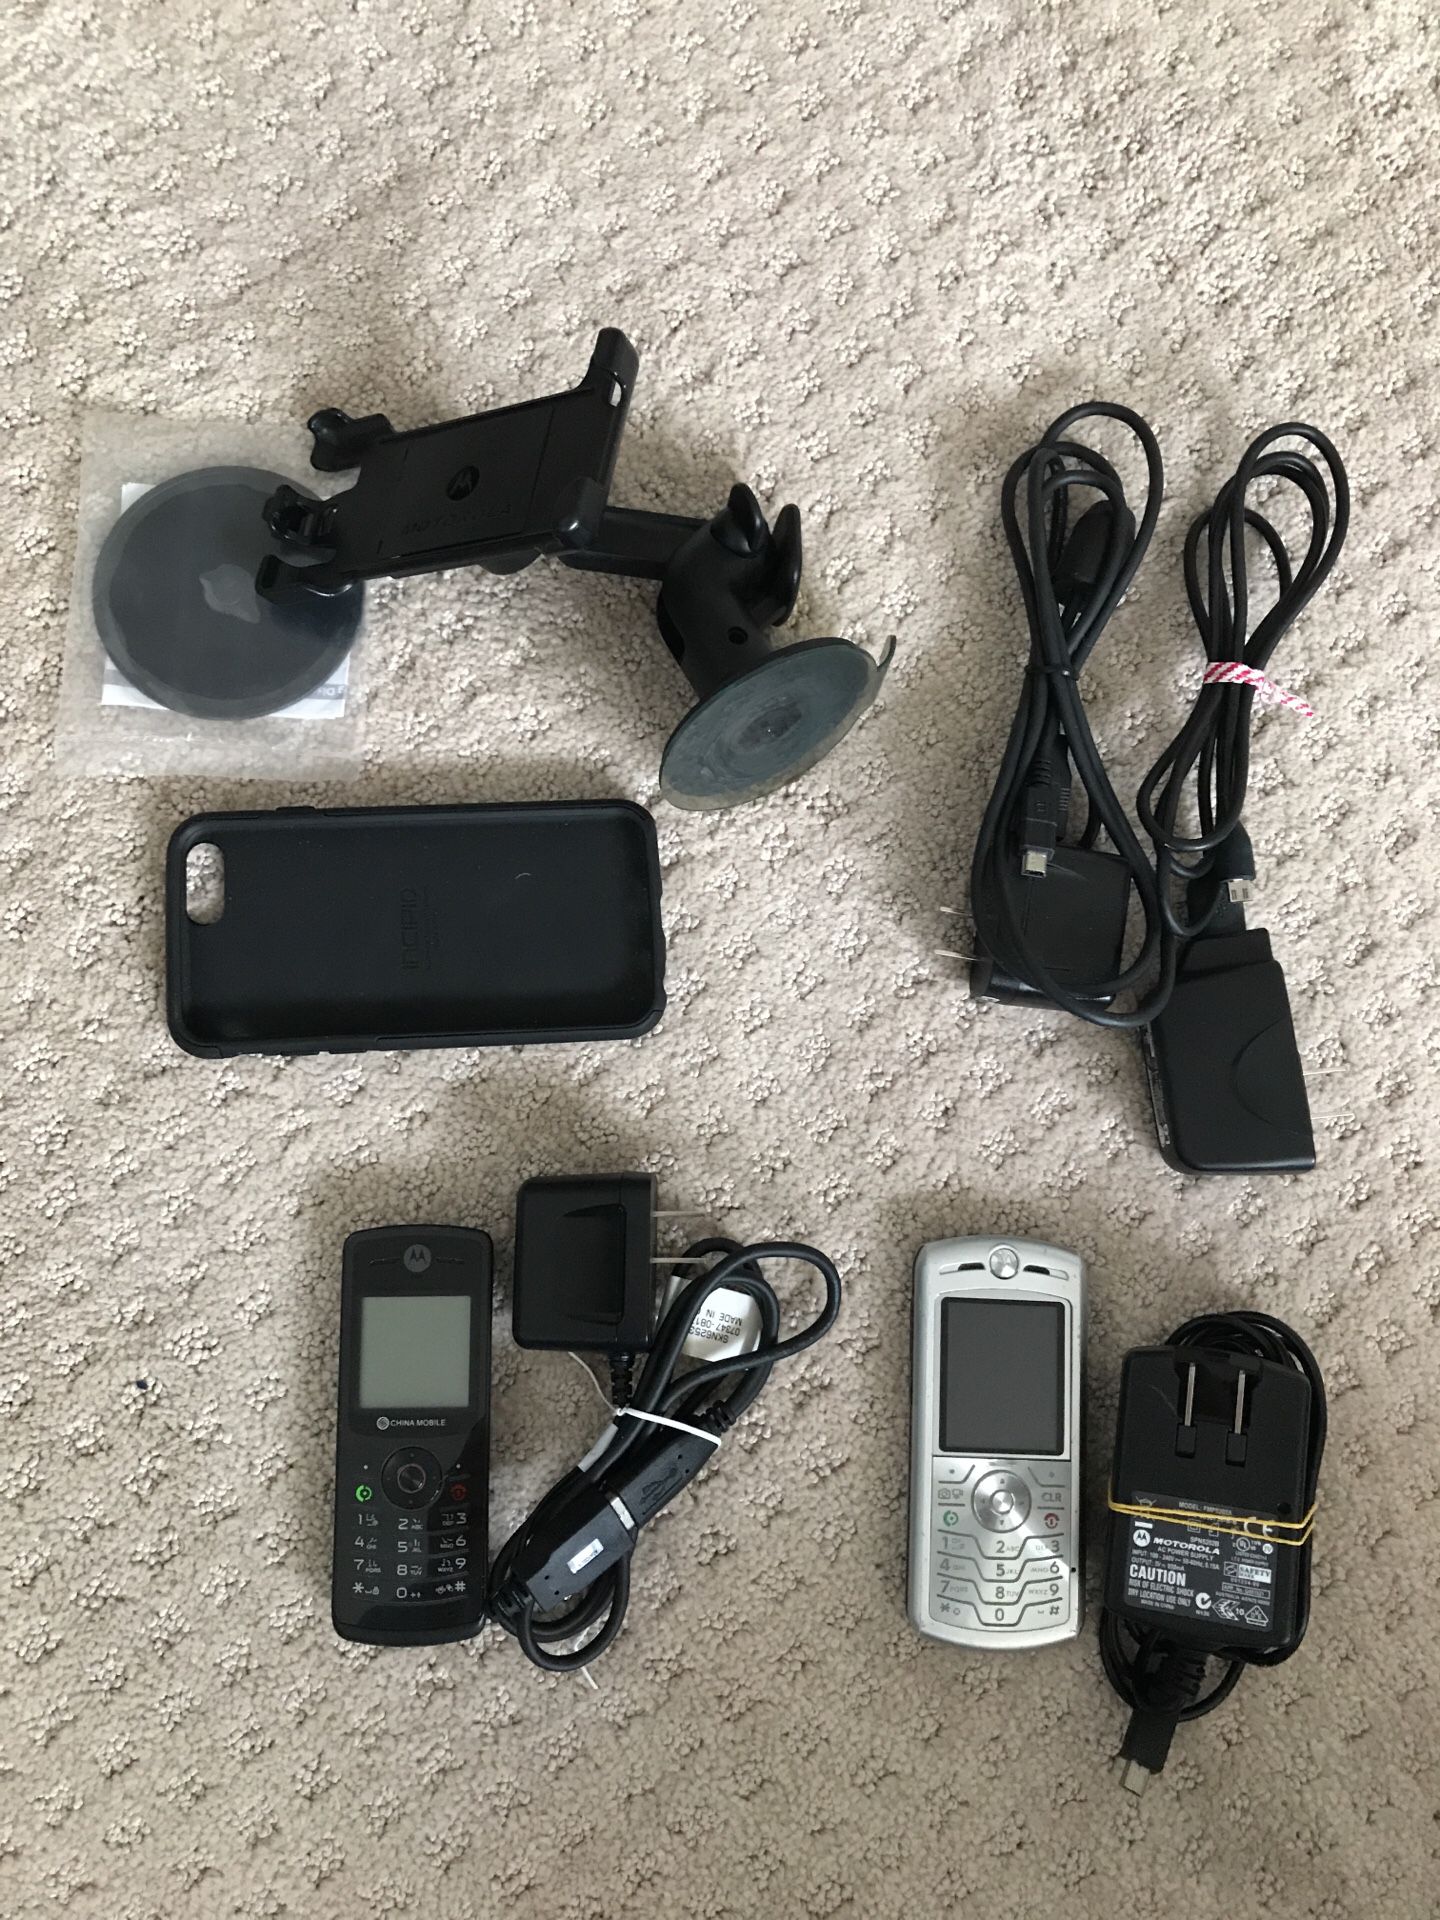 Cell phone, charger, case, car mount